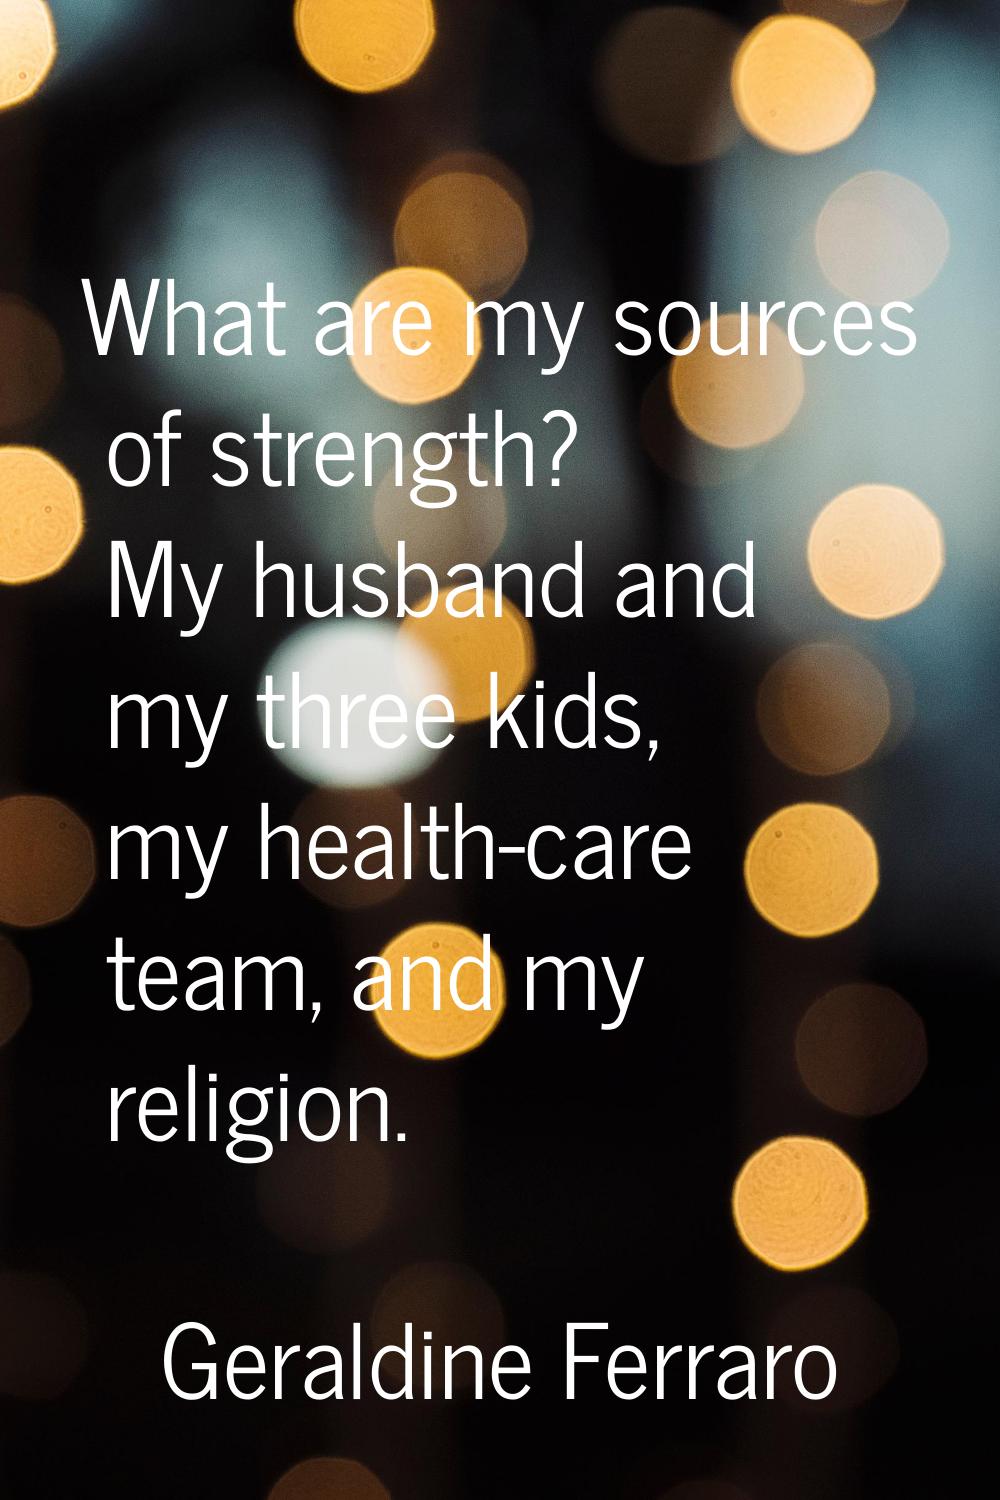 What are my sources of strength? My husband and my three kids, my health-care team, and my religion